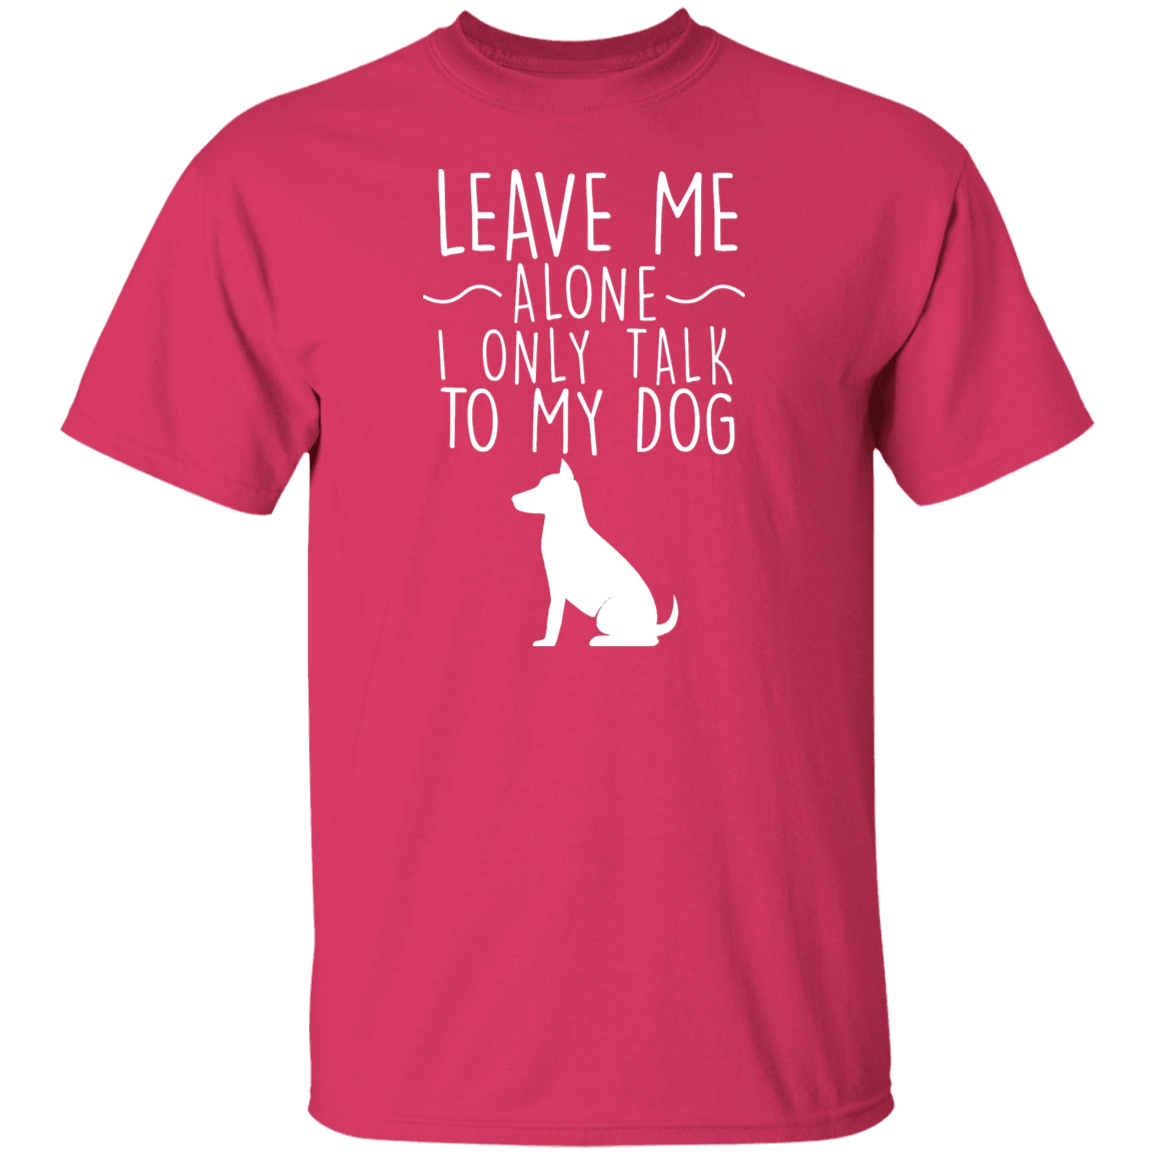 Leave Me Alone - T Shirt.